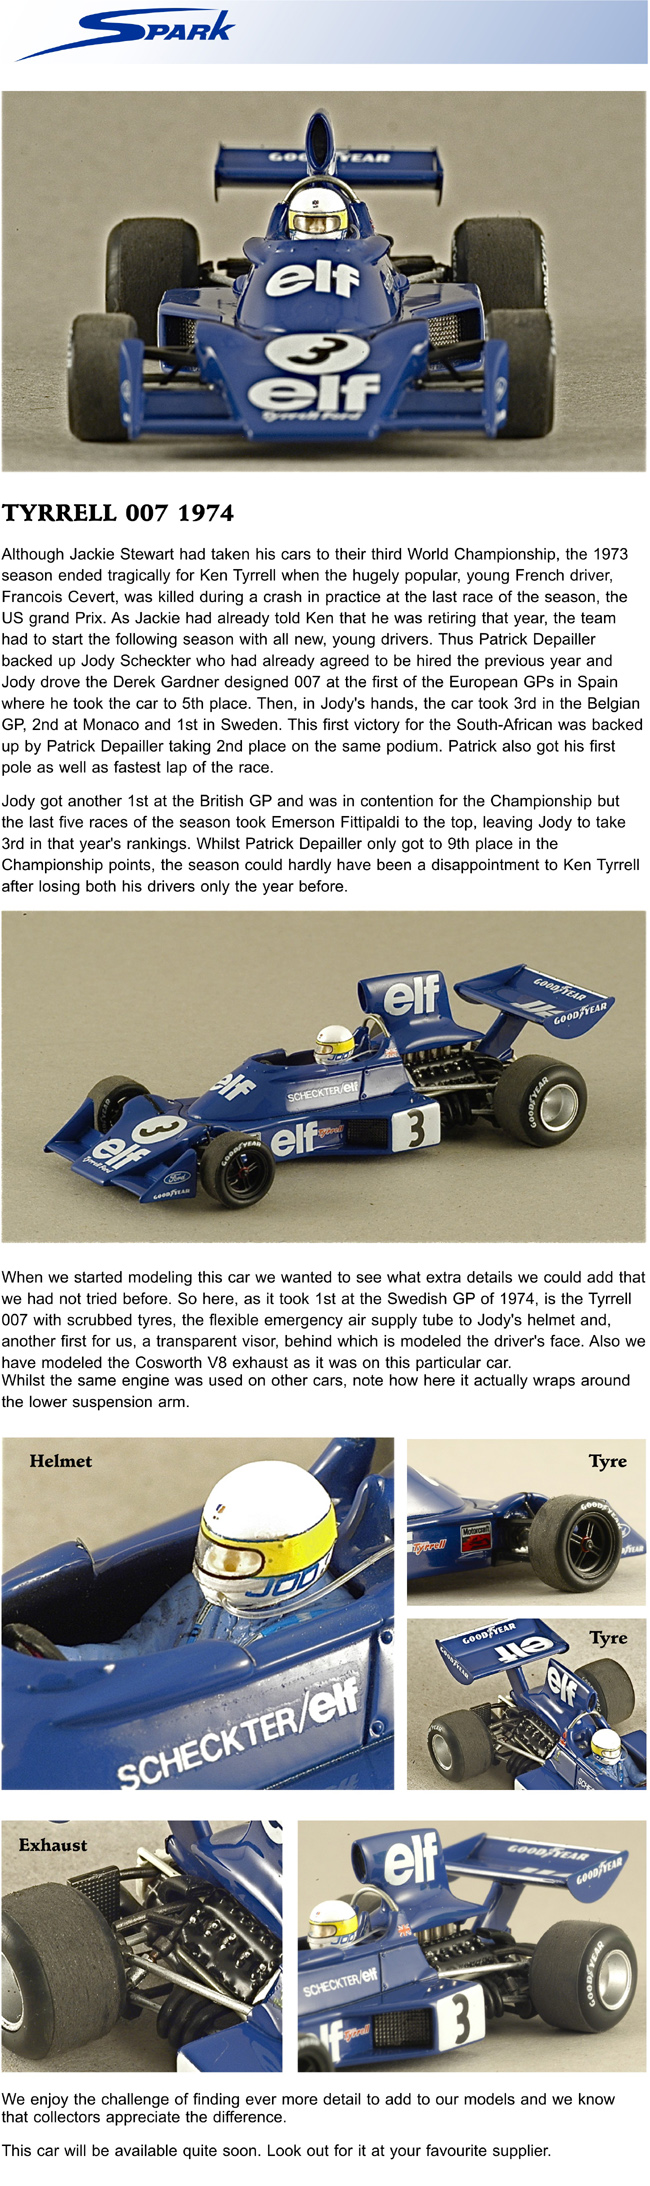 Scale143.com â€¢ View topic - Spark Newsletter - Tyrrell 007 1974